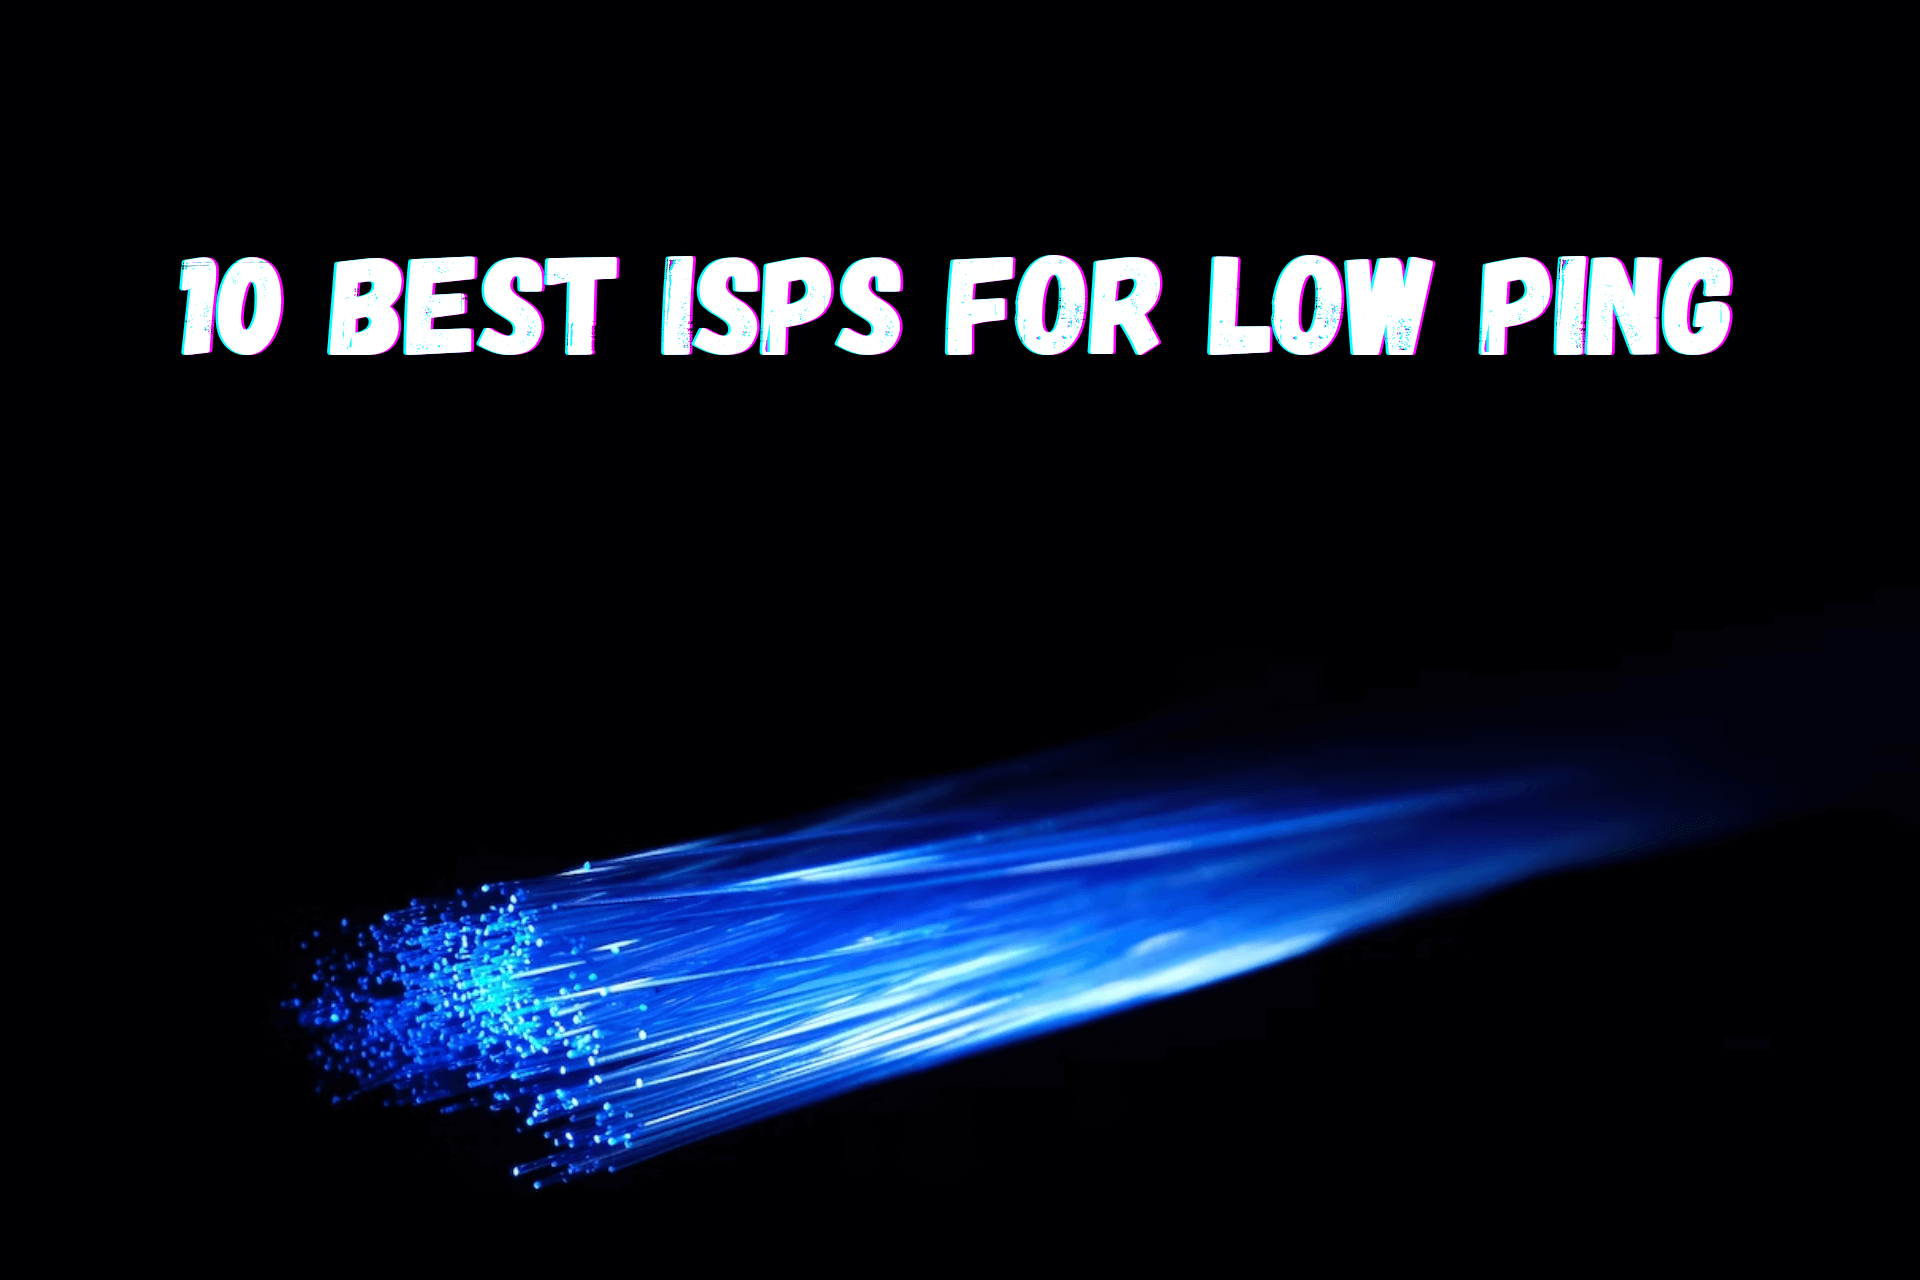 Best ISP for Ping